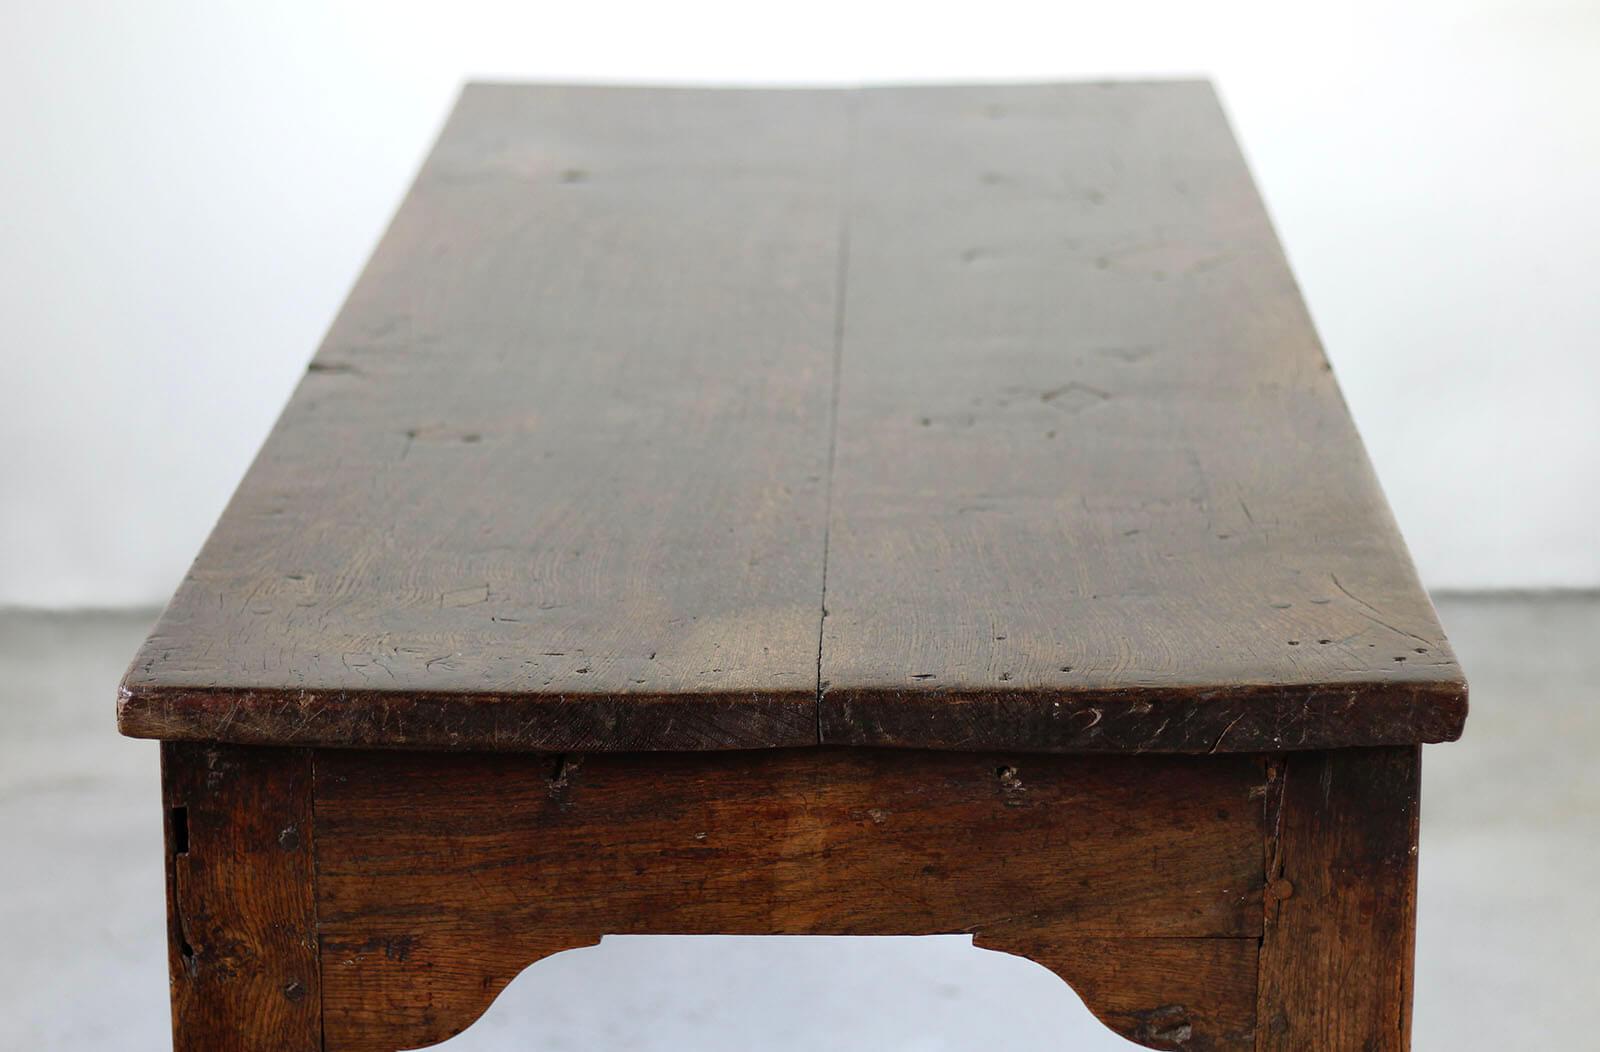 Solid Oak Table, circa 19th Century, Rustic Style, Prep or Dining Table In Good Condition For Sale In Wrocław, Poland